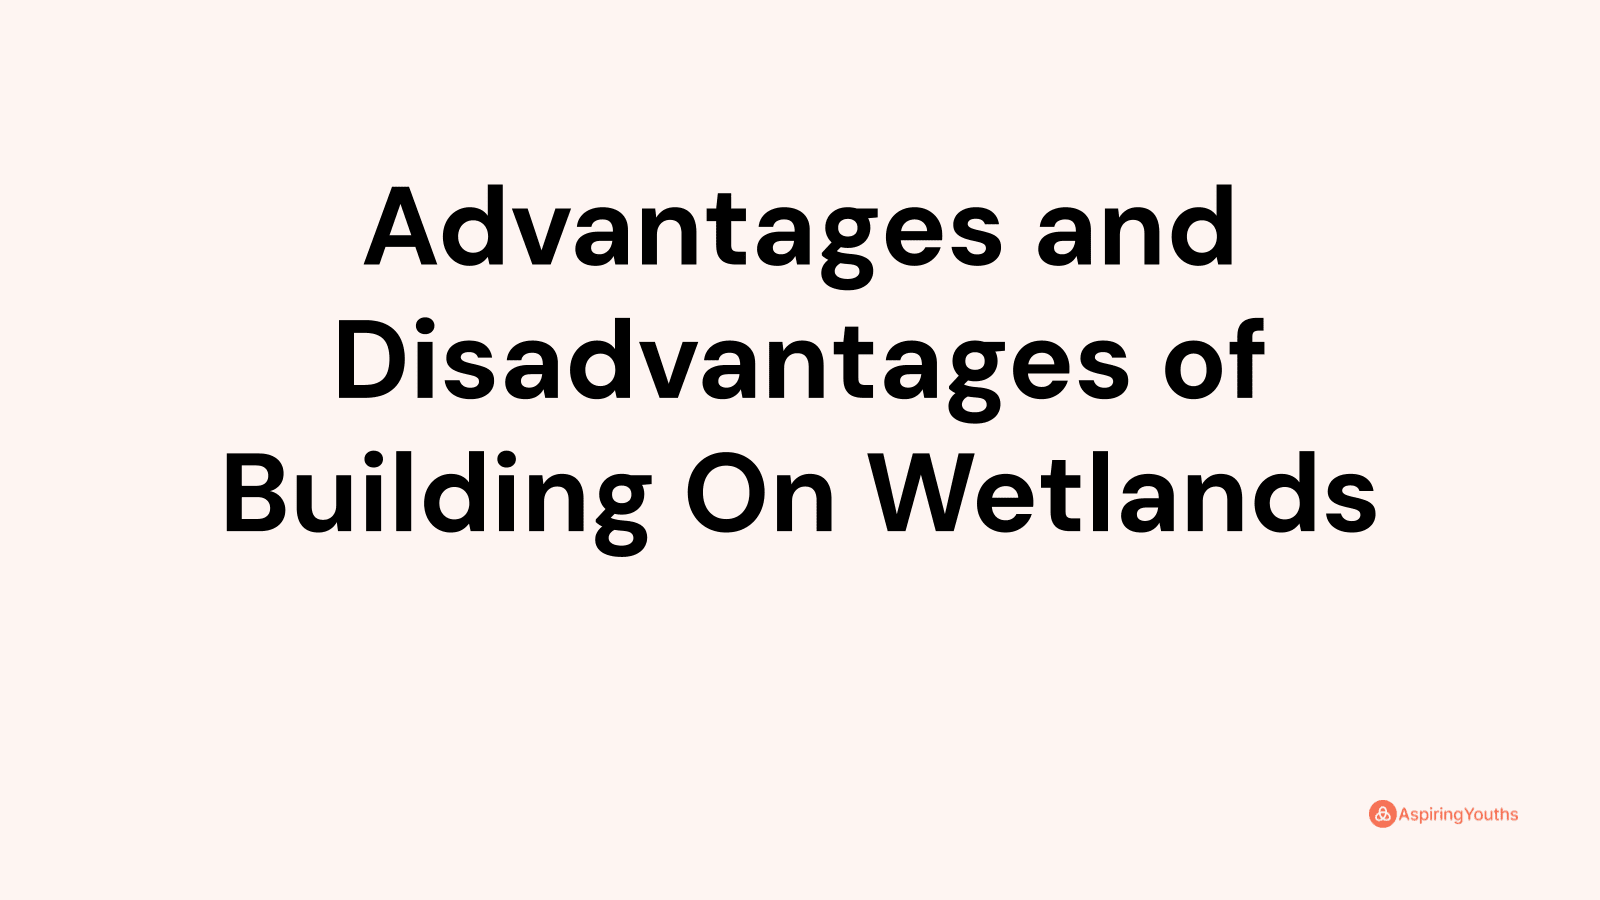 Advantages and disadvantages of Building On Wetlands